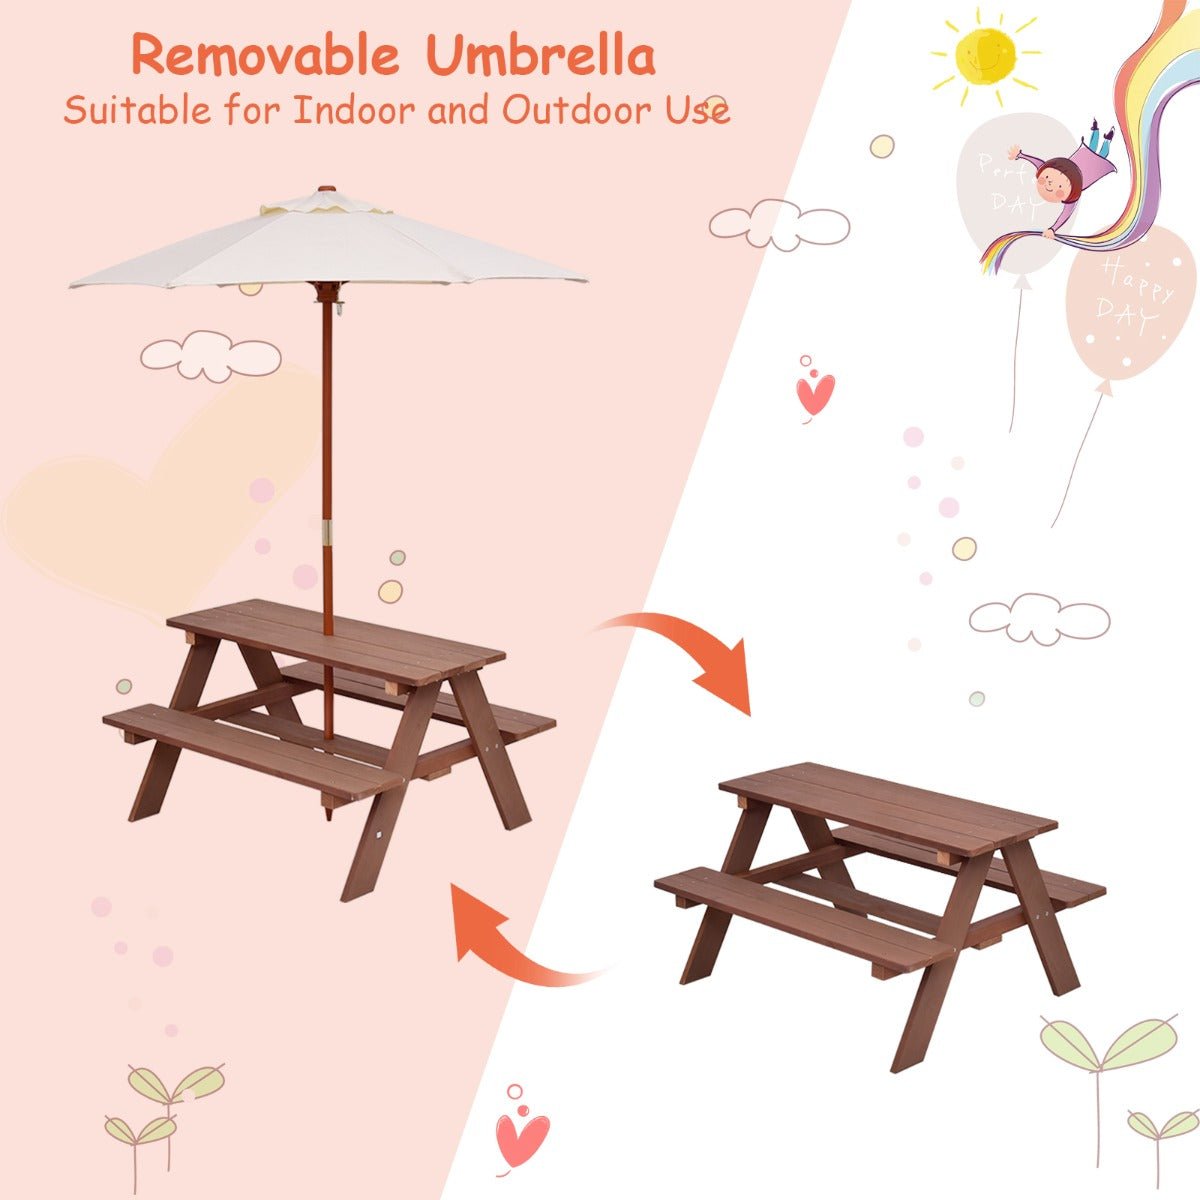 Kids Garden Adventure: 3-in-1 Picnic Table Set with Removable Umbrella